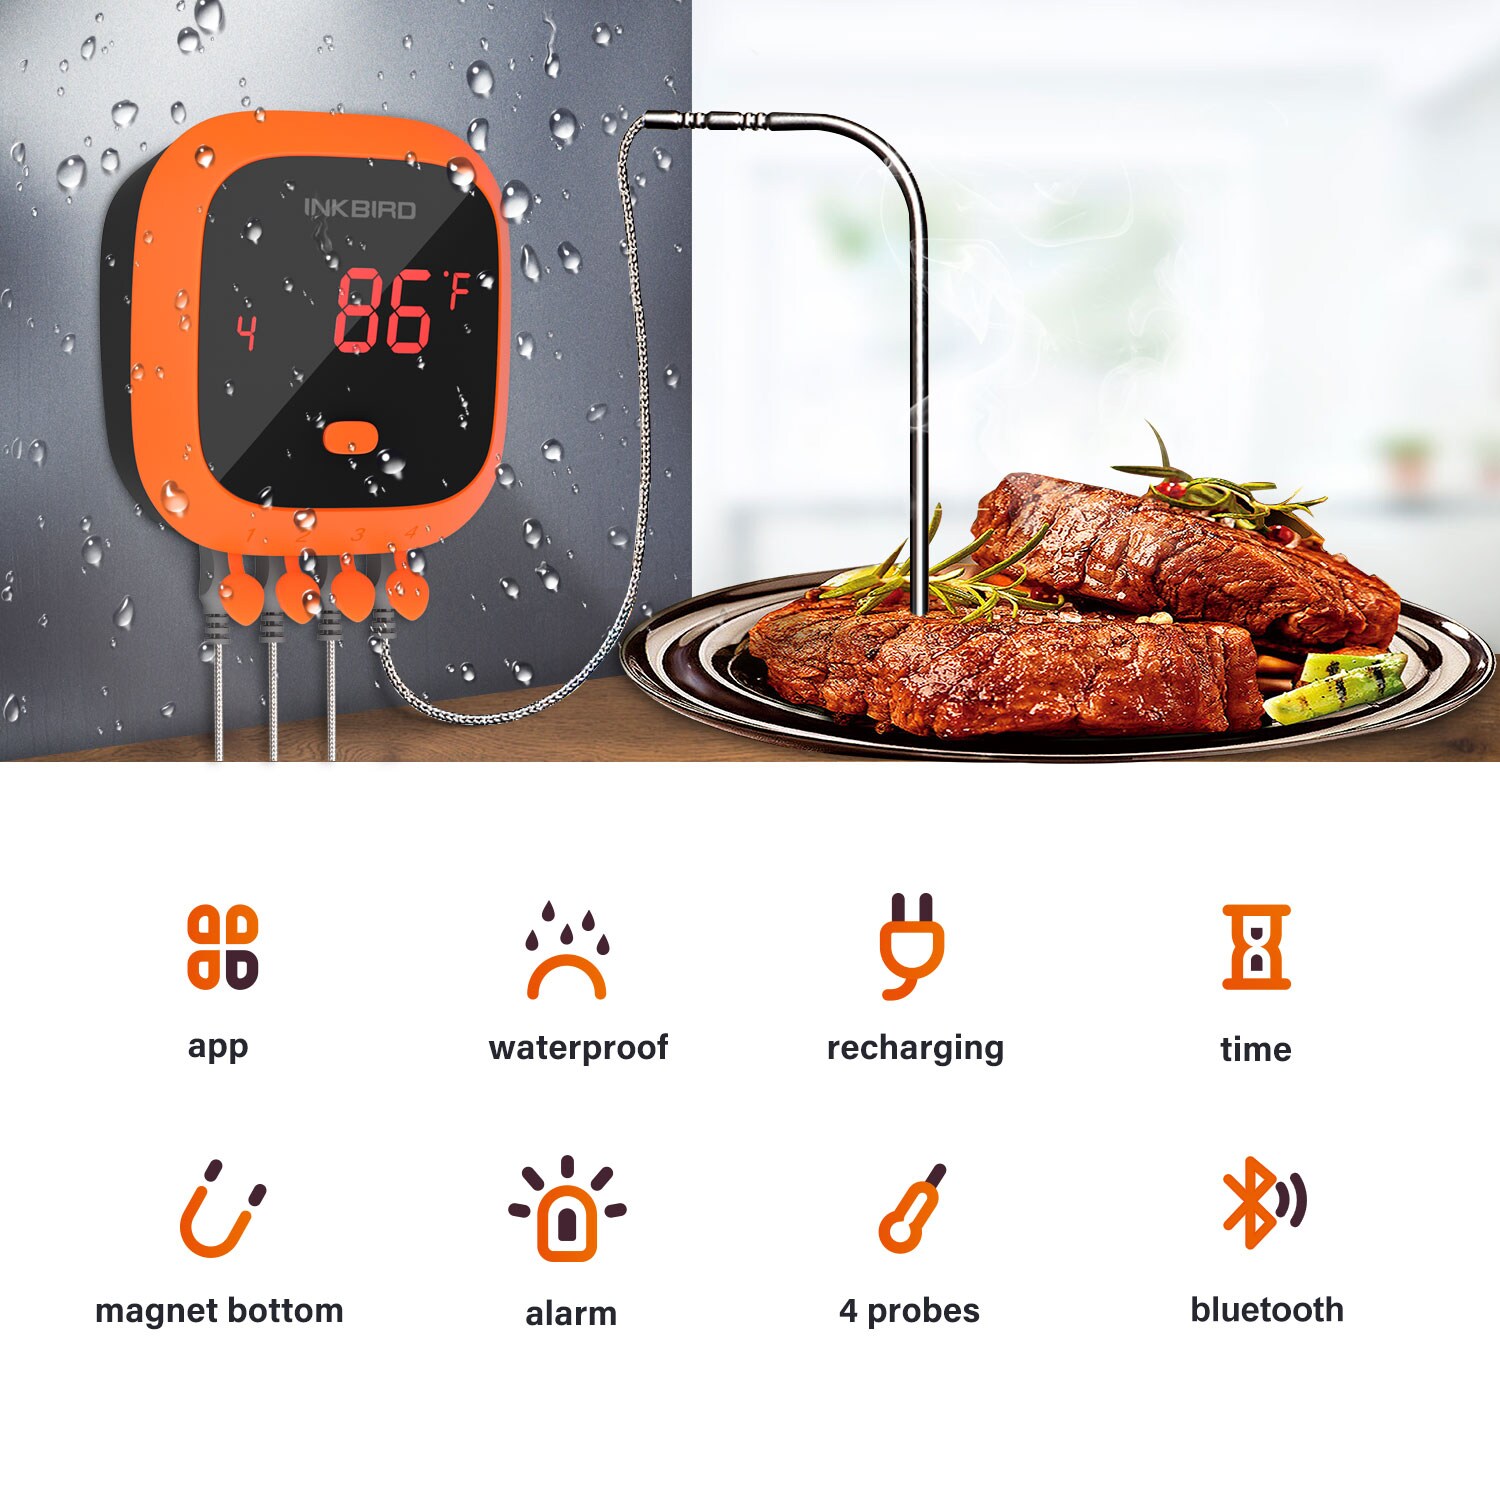 Inkbird Wireless Meat Thermometer, 4 Probes Bluetooth Meat Thermometers for Grilling  Smoking Smart Timer LCD Backlight Cooking Thermometer for Oven Outside BBQ  Grill Smoker Accessories Gifts for Men